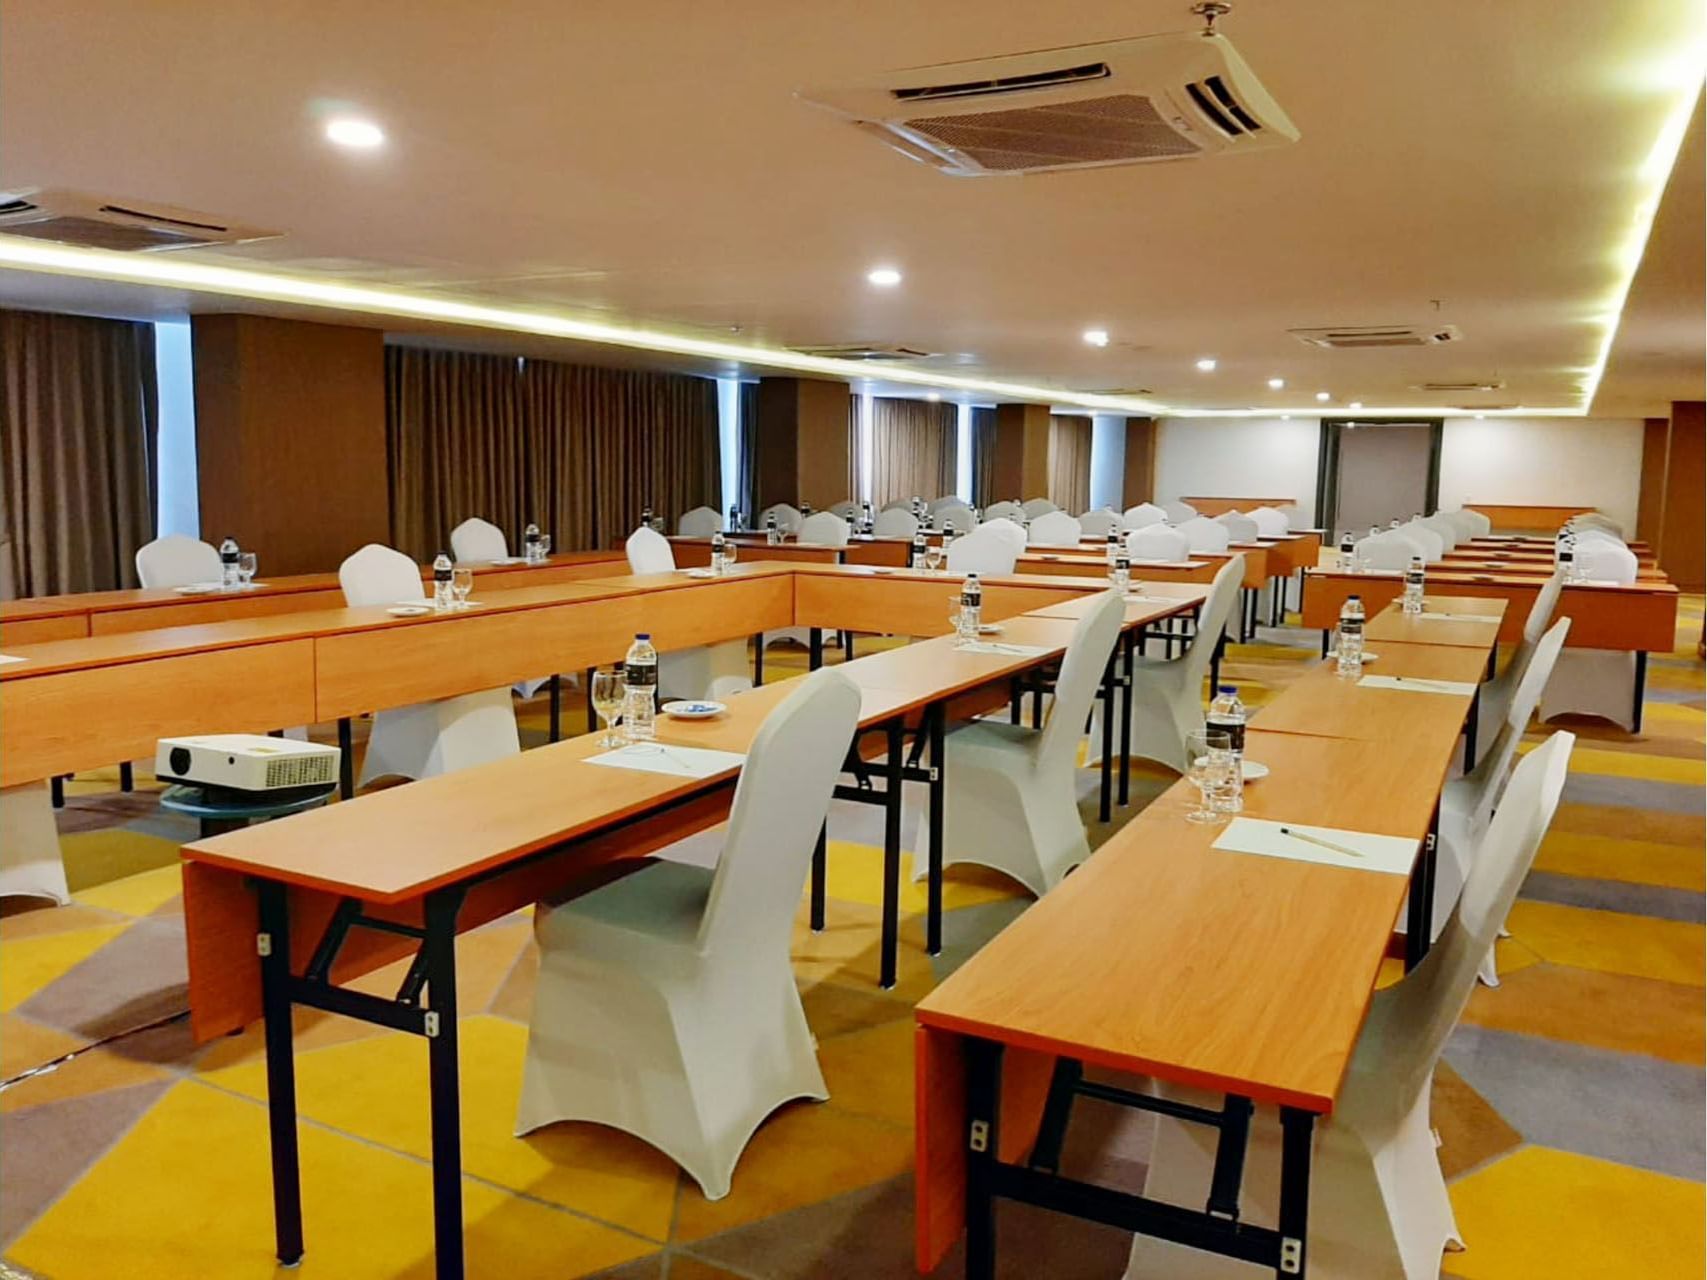 Classroom type event table set up in Meeting Room 4 at LK Pemuda Semarang Hotel & Residences